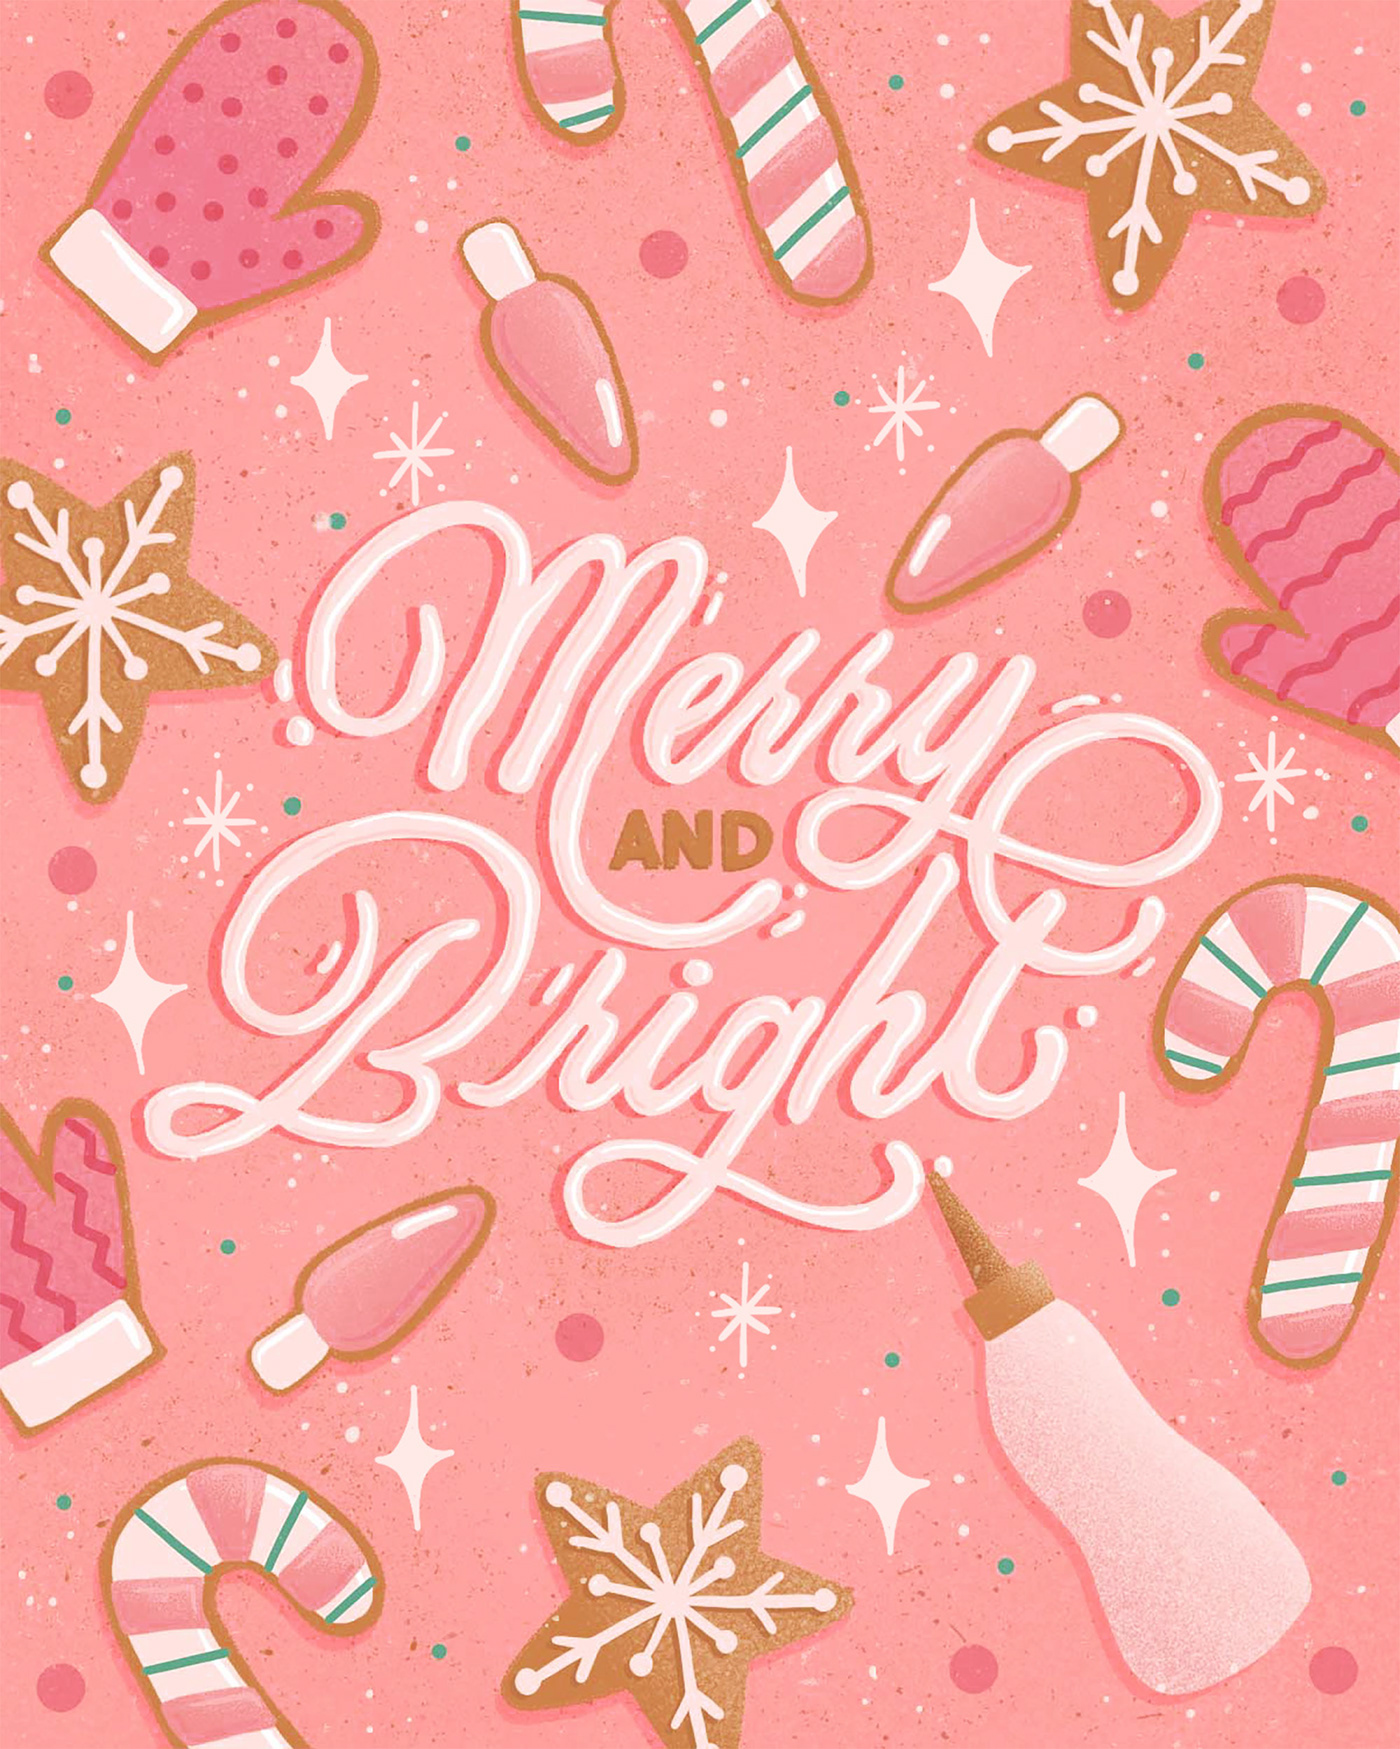 Digital art featuring festive frosting hand lettering surrounded by cookie illustrations